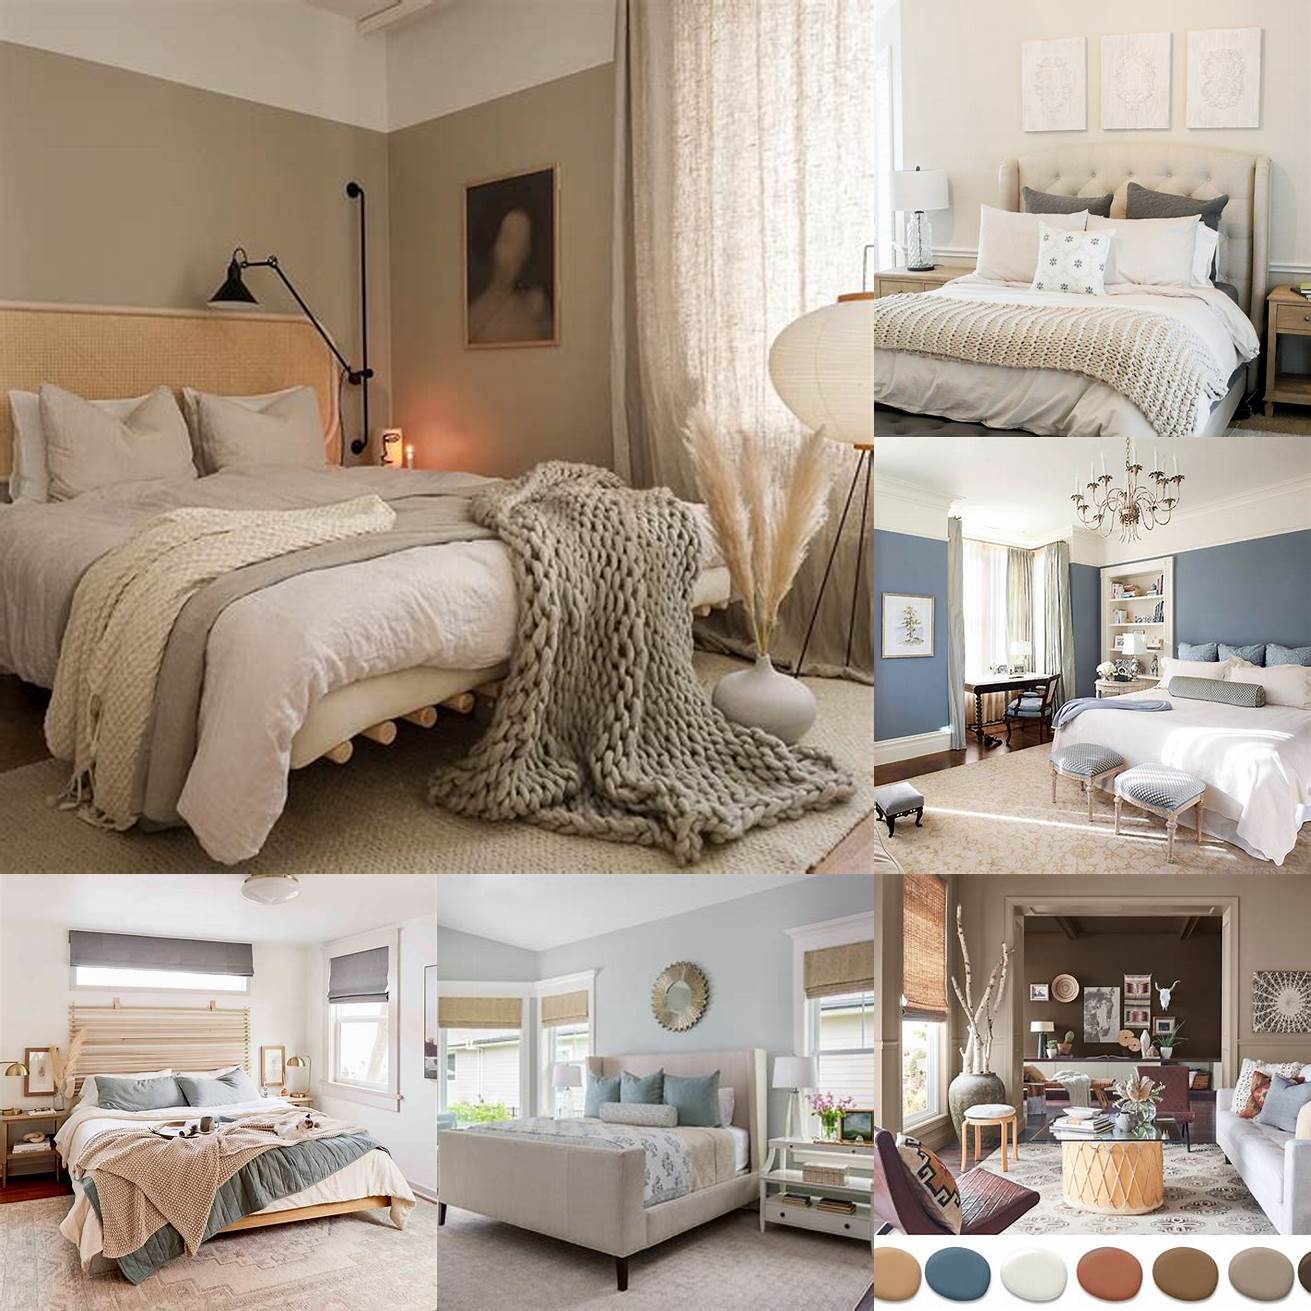 Neutral color palette with white bedding and wooden accents